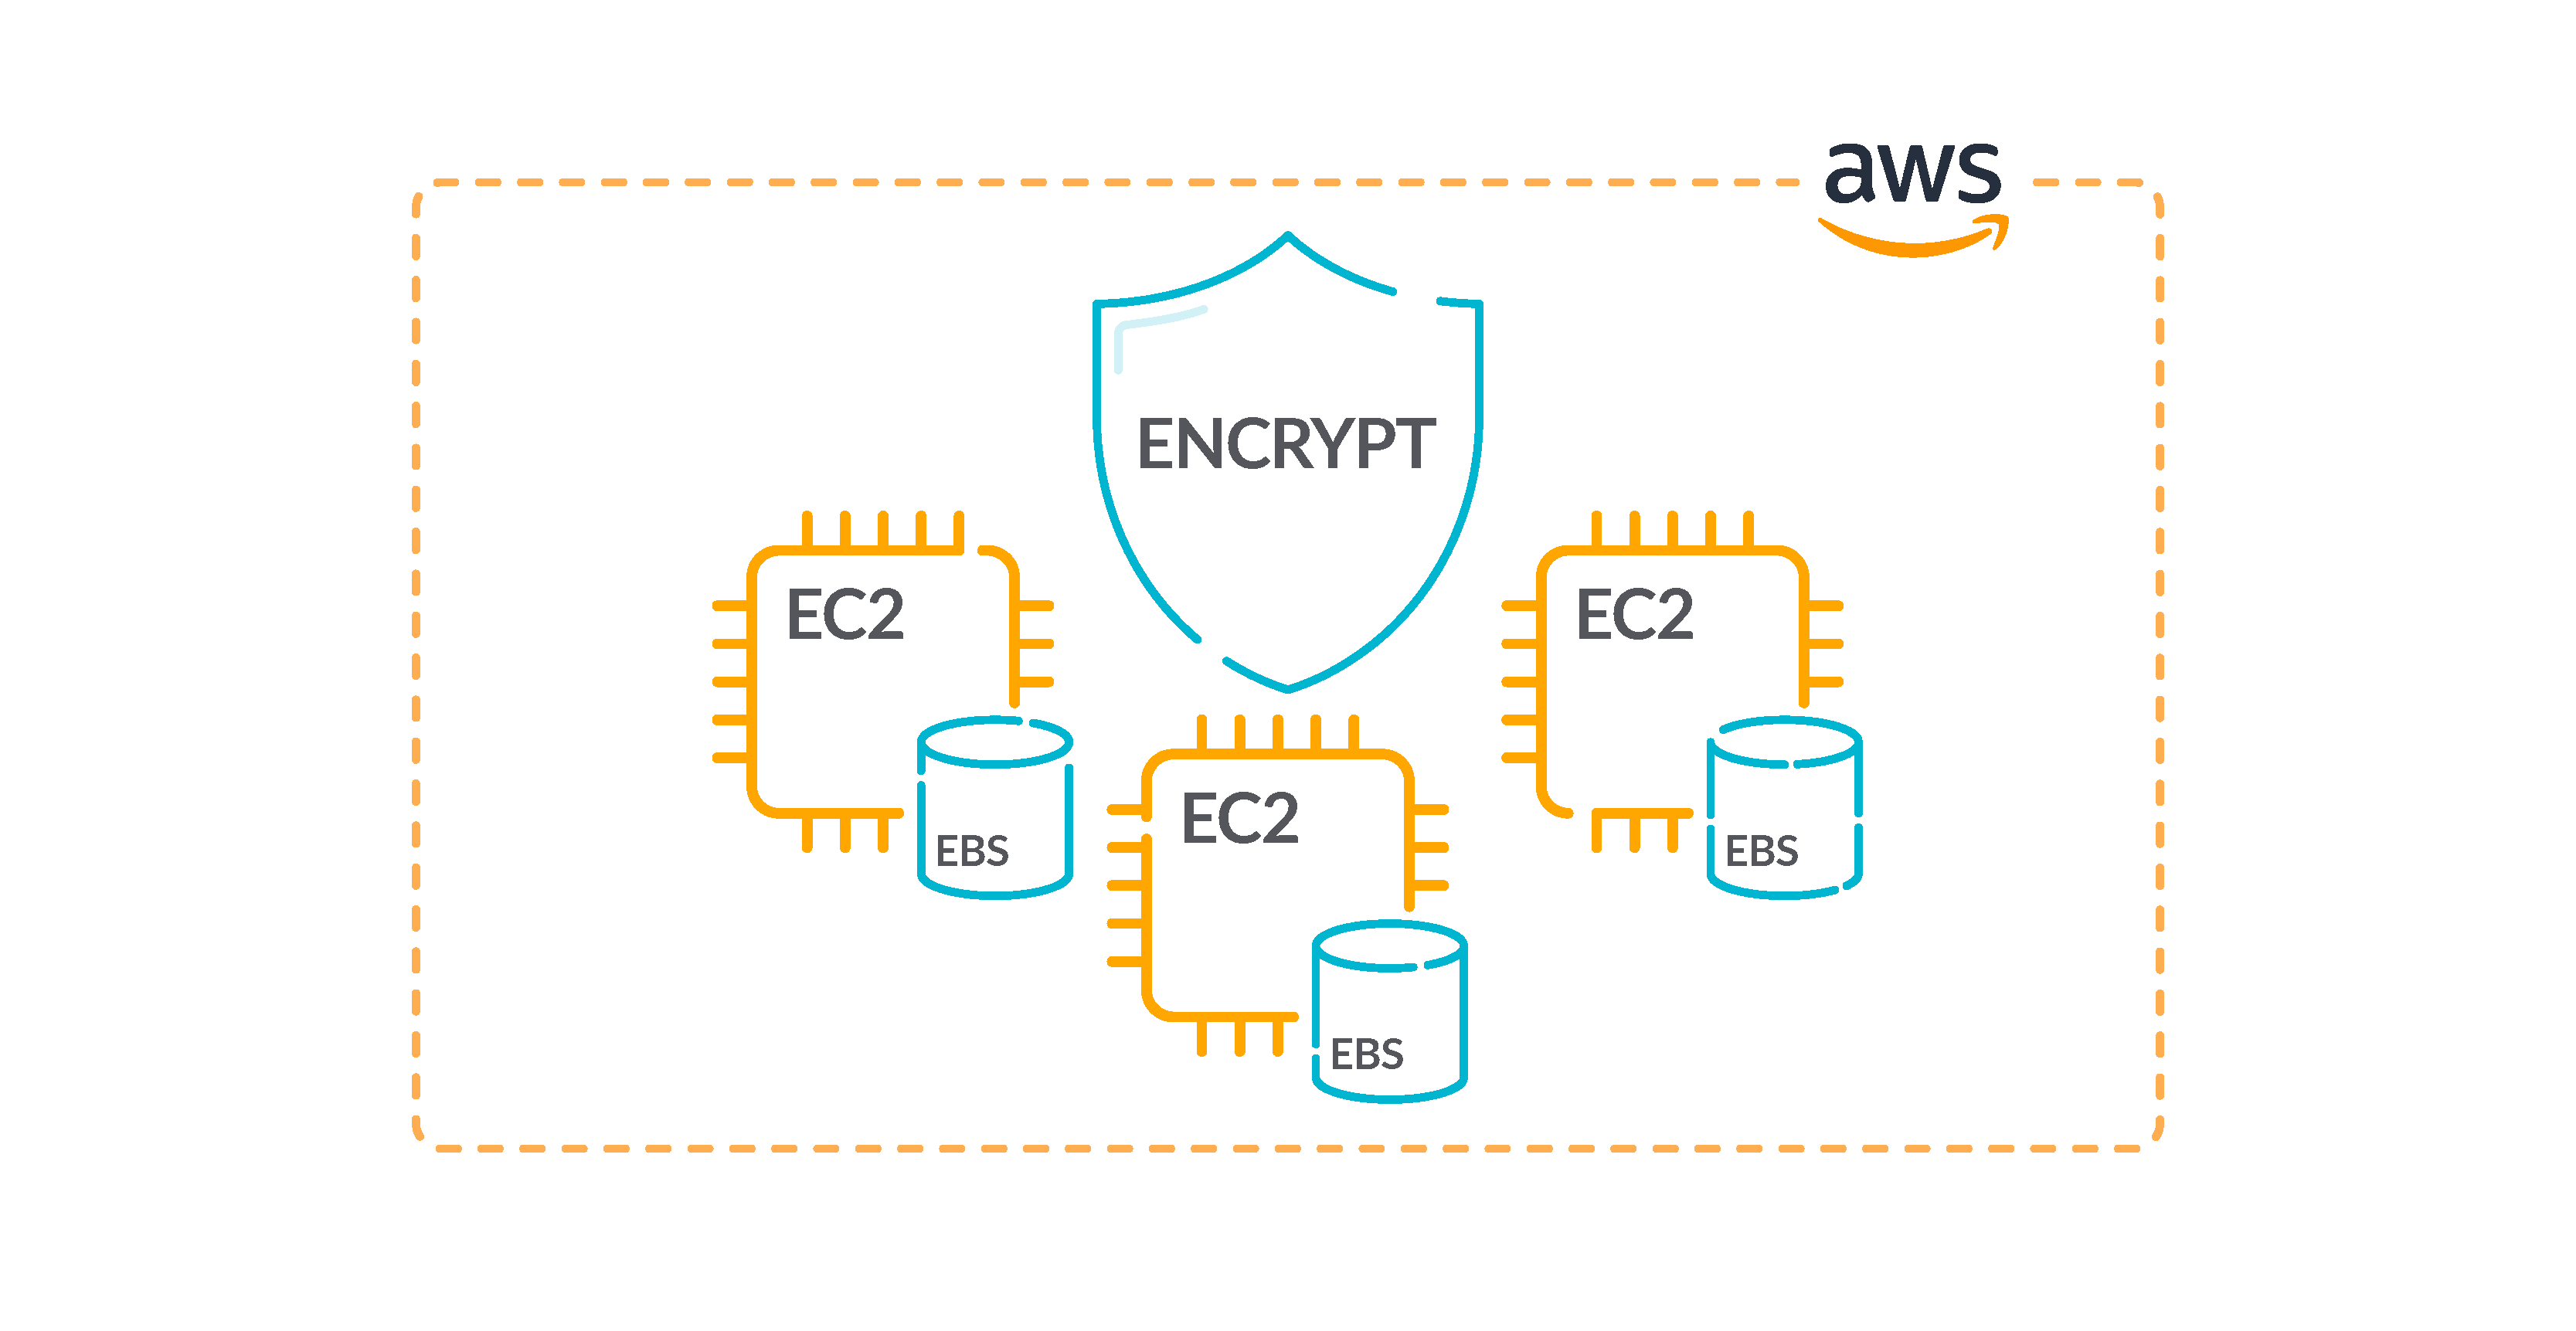 AWS security best practices encrypt ebs at rest